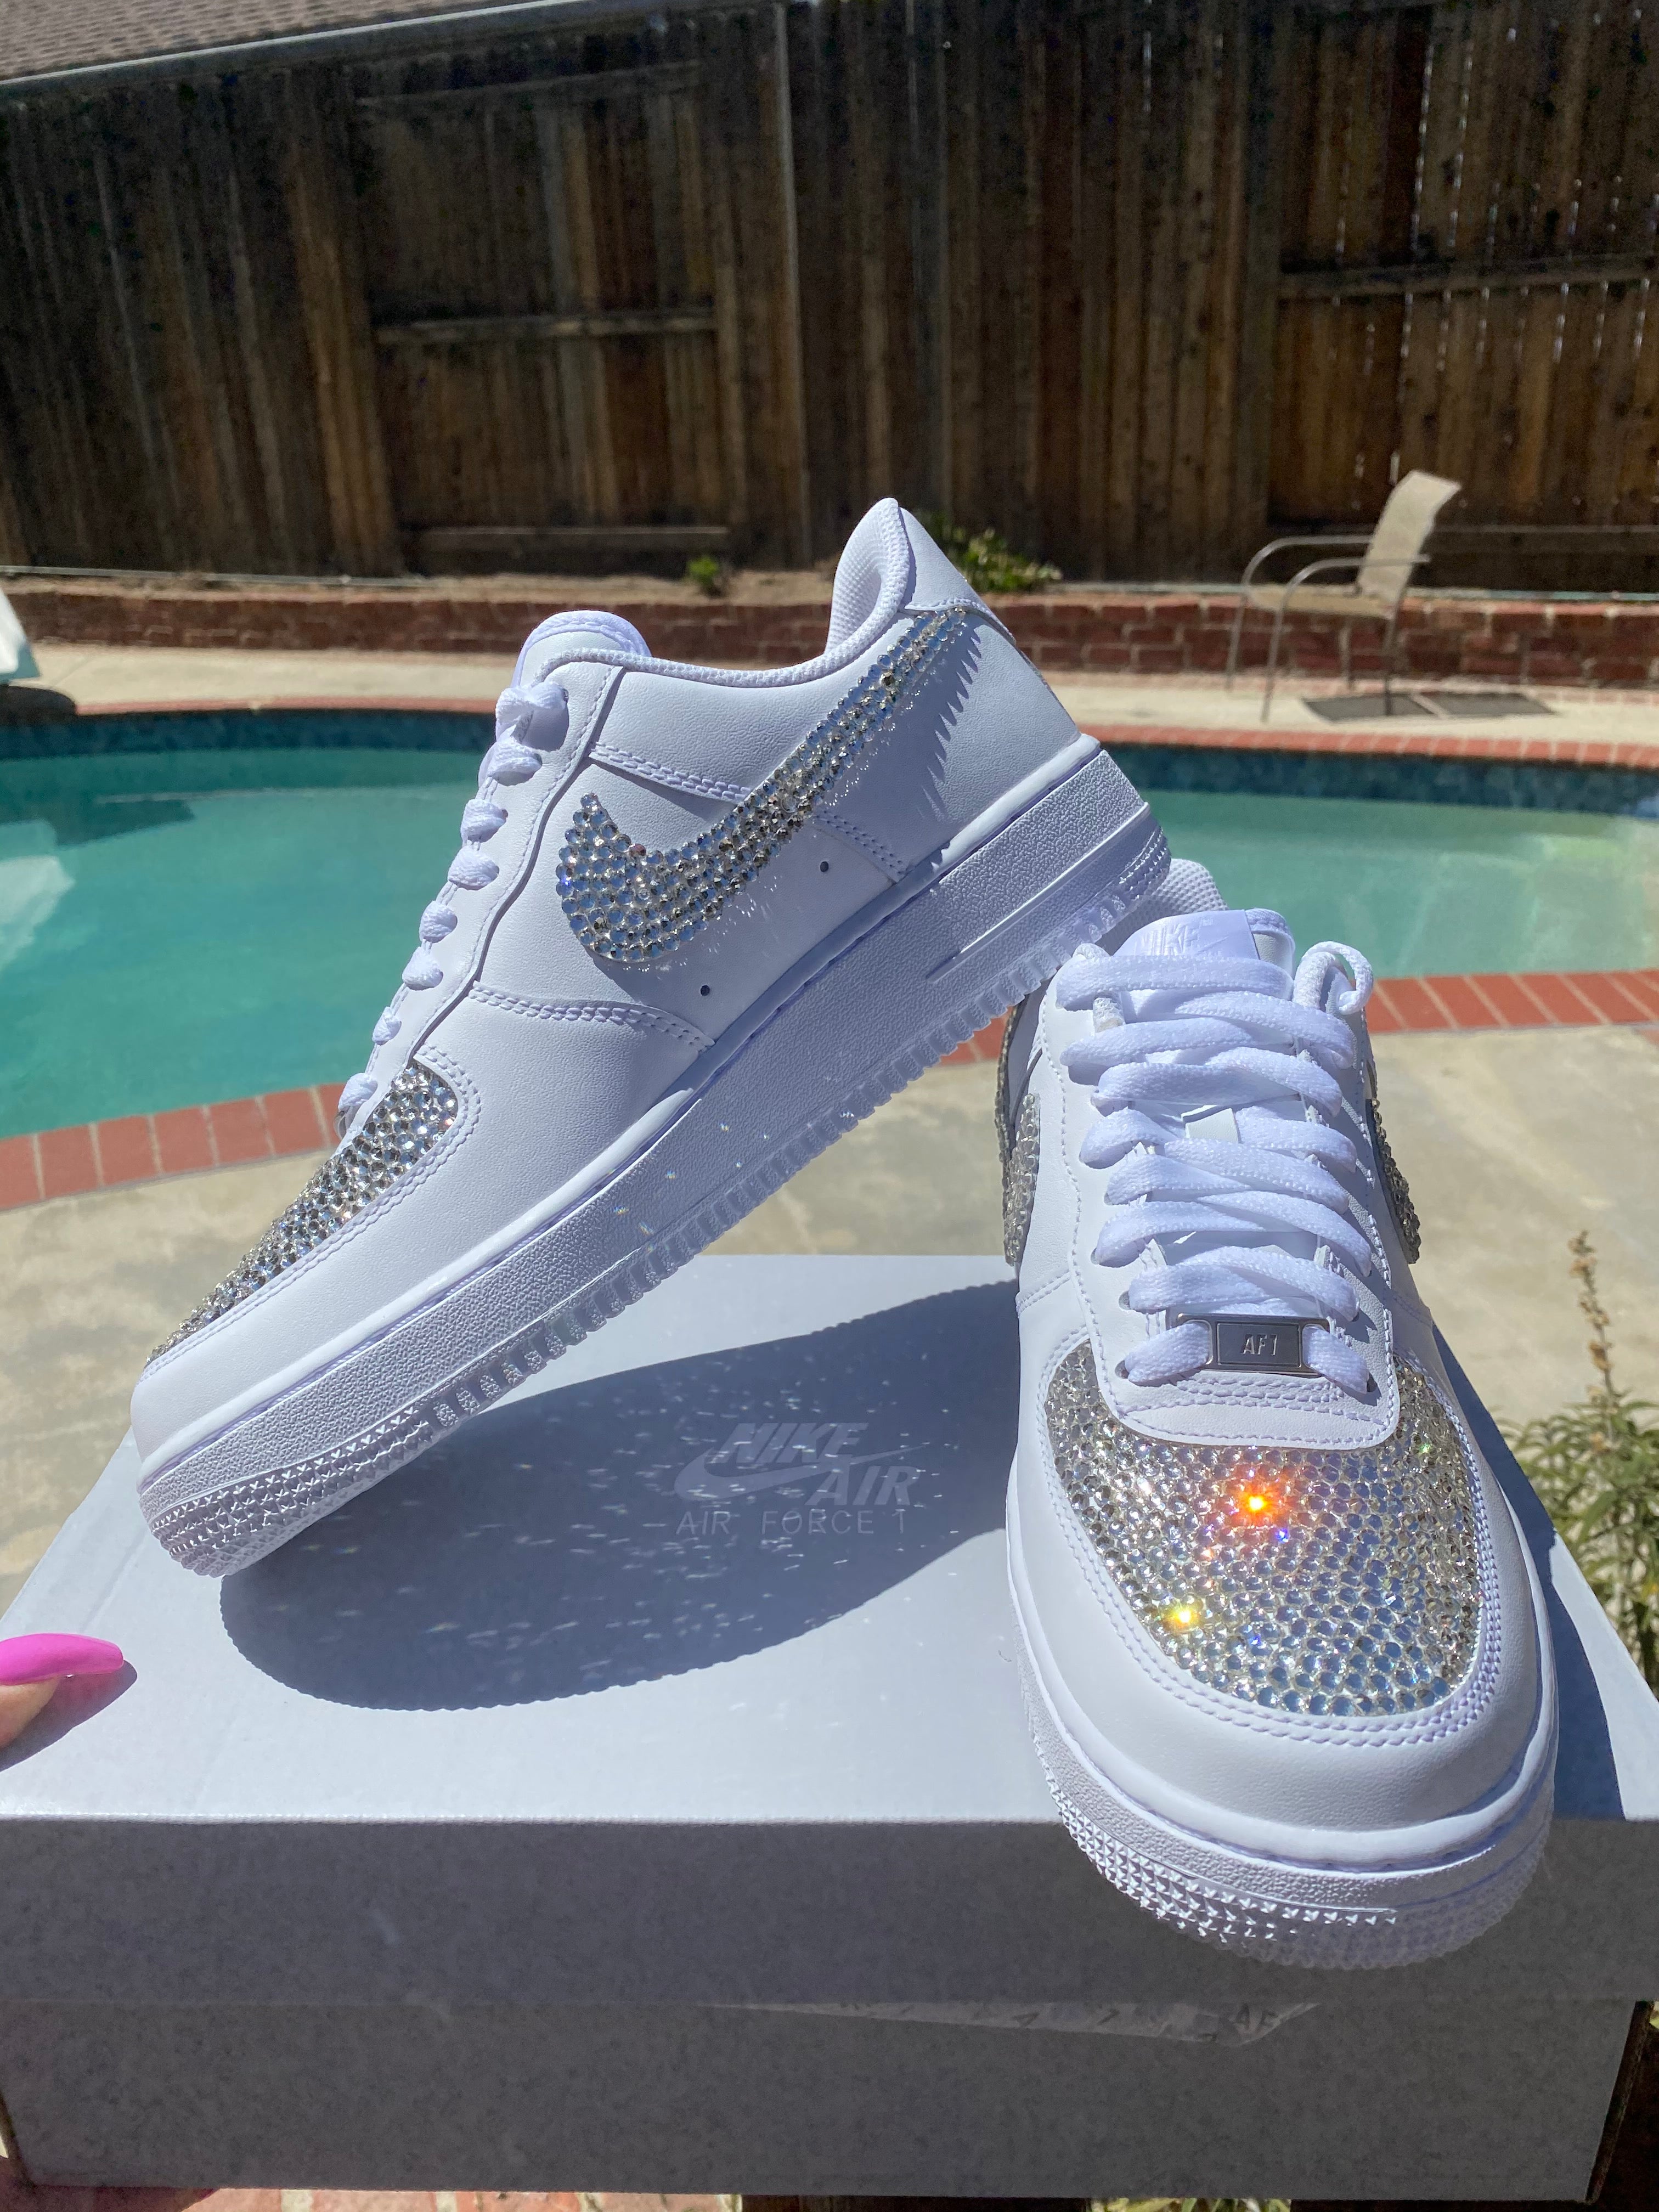 Crystalized Air Force 1 – Bling'd Up